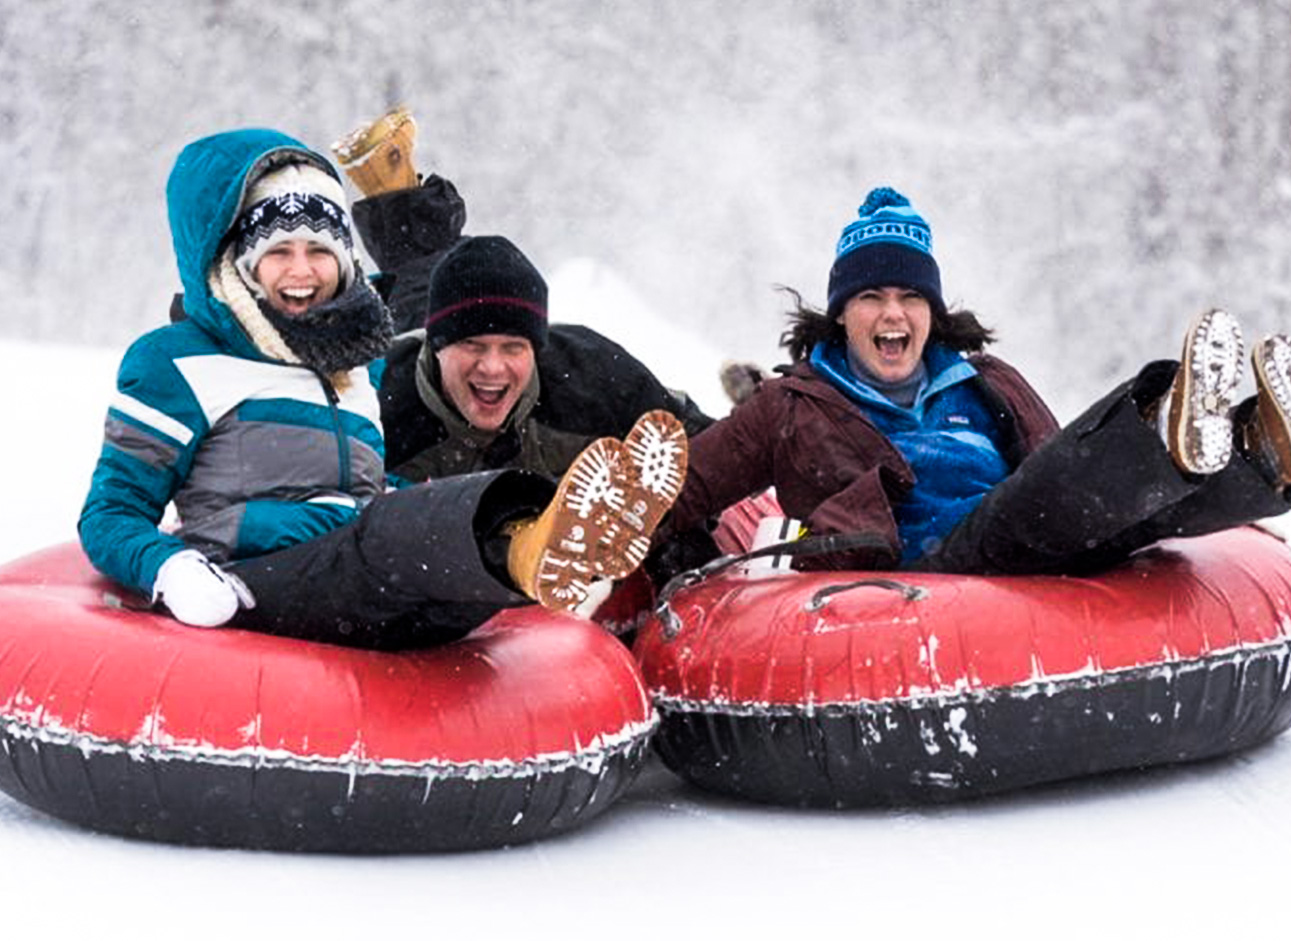 Snow Tube - Experience the thrill of snow tubing and sliding down snowy slopes